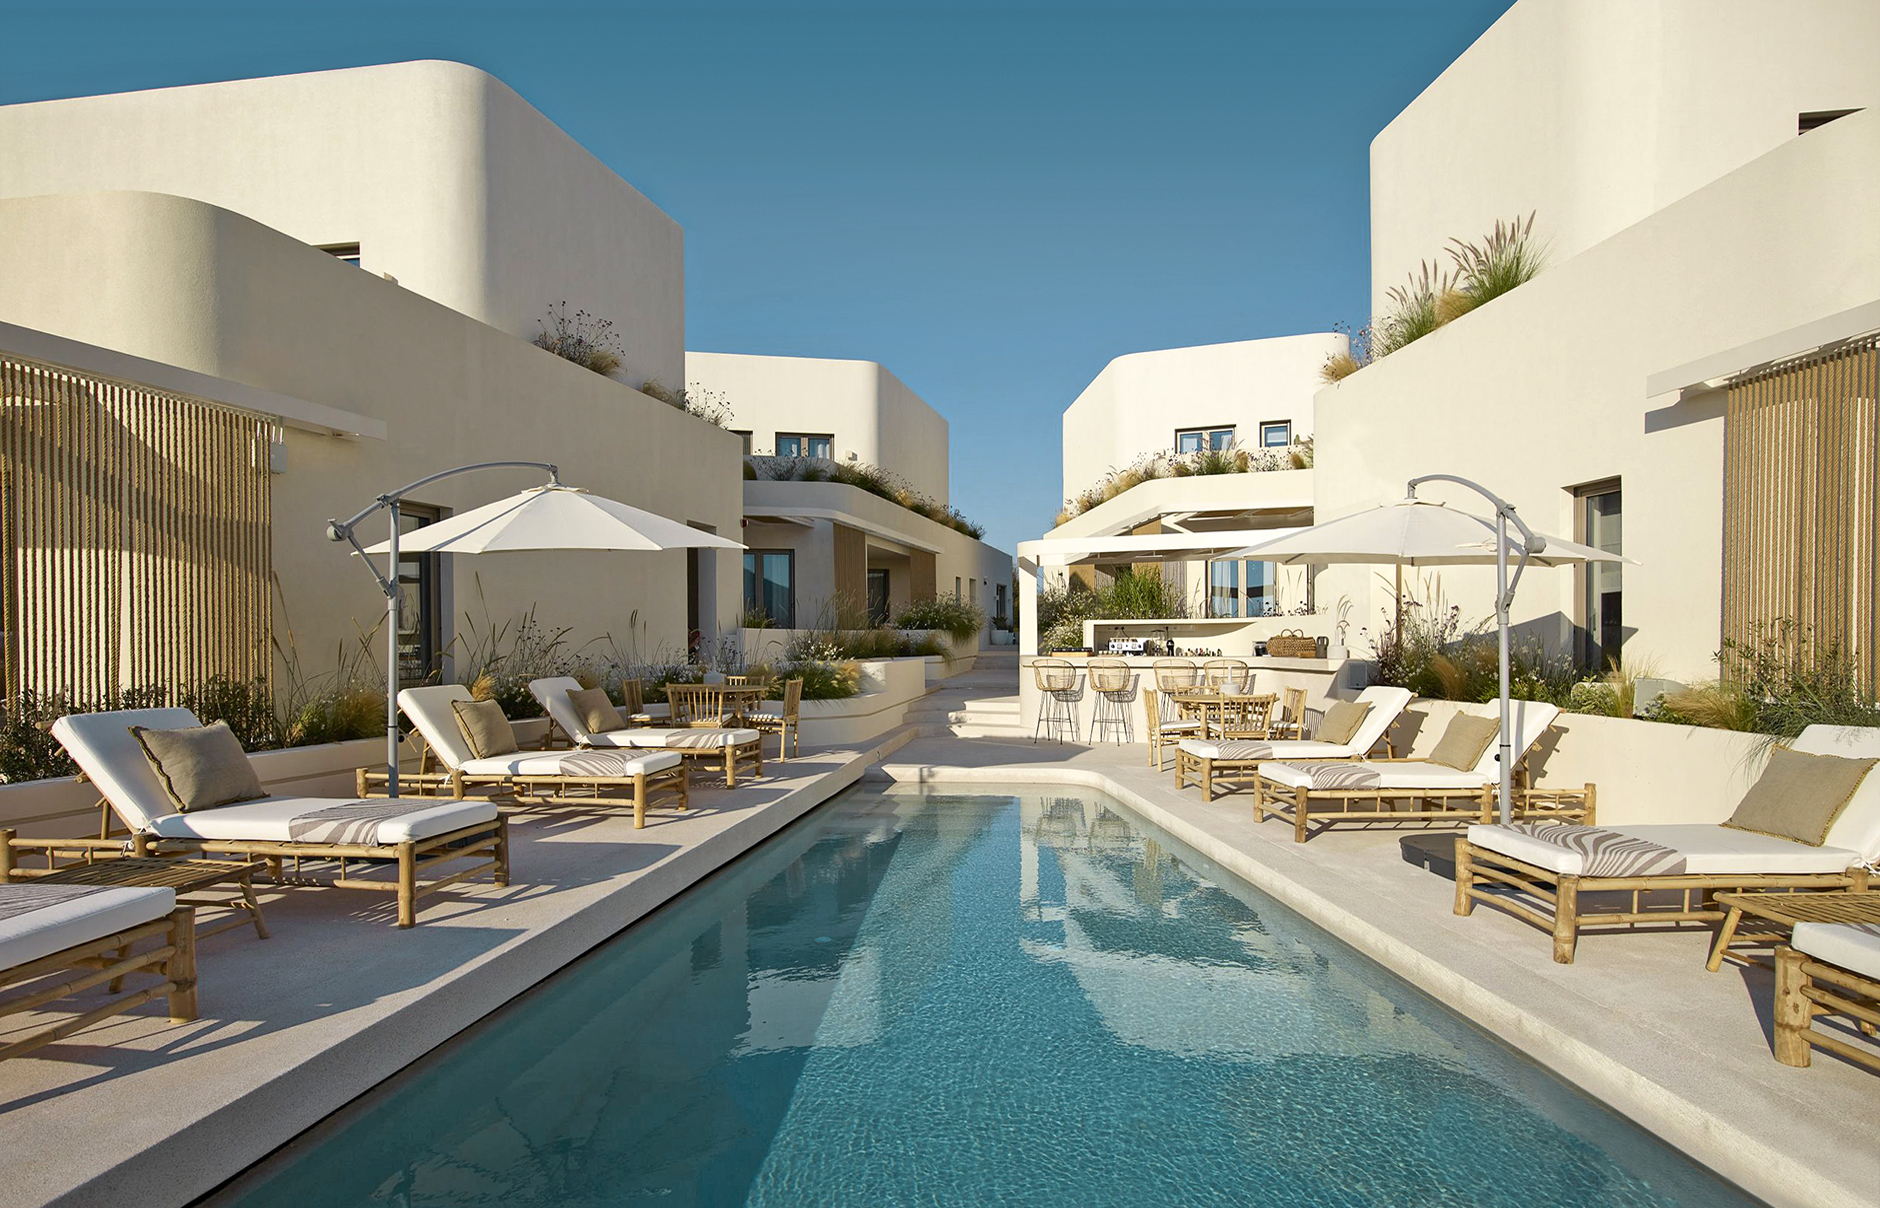 White Pebble Suites, Milos. The Ultimate Guide to the Best Chic Hotels in Milos, Greece. Travelplusstyle.com